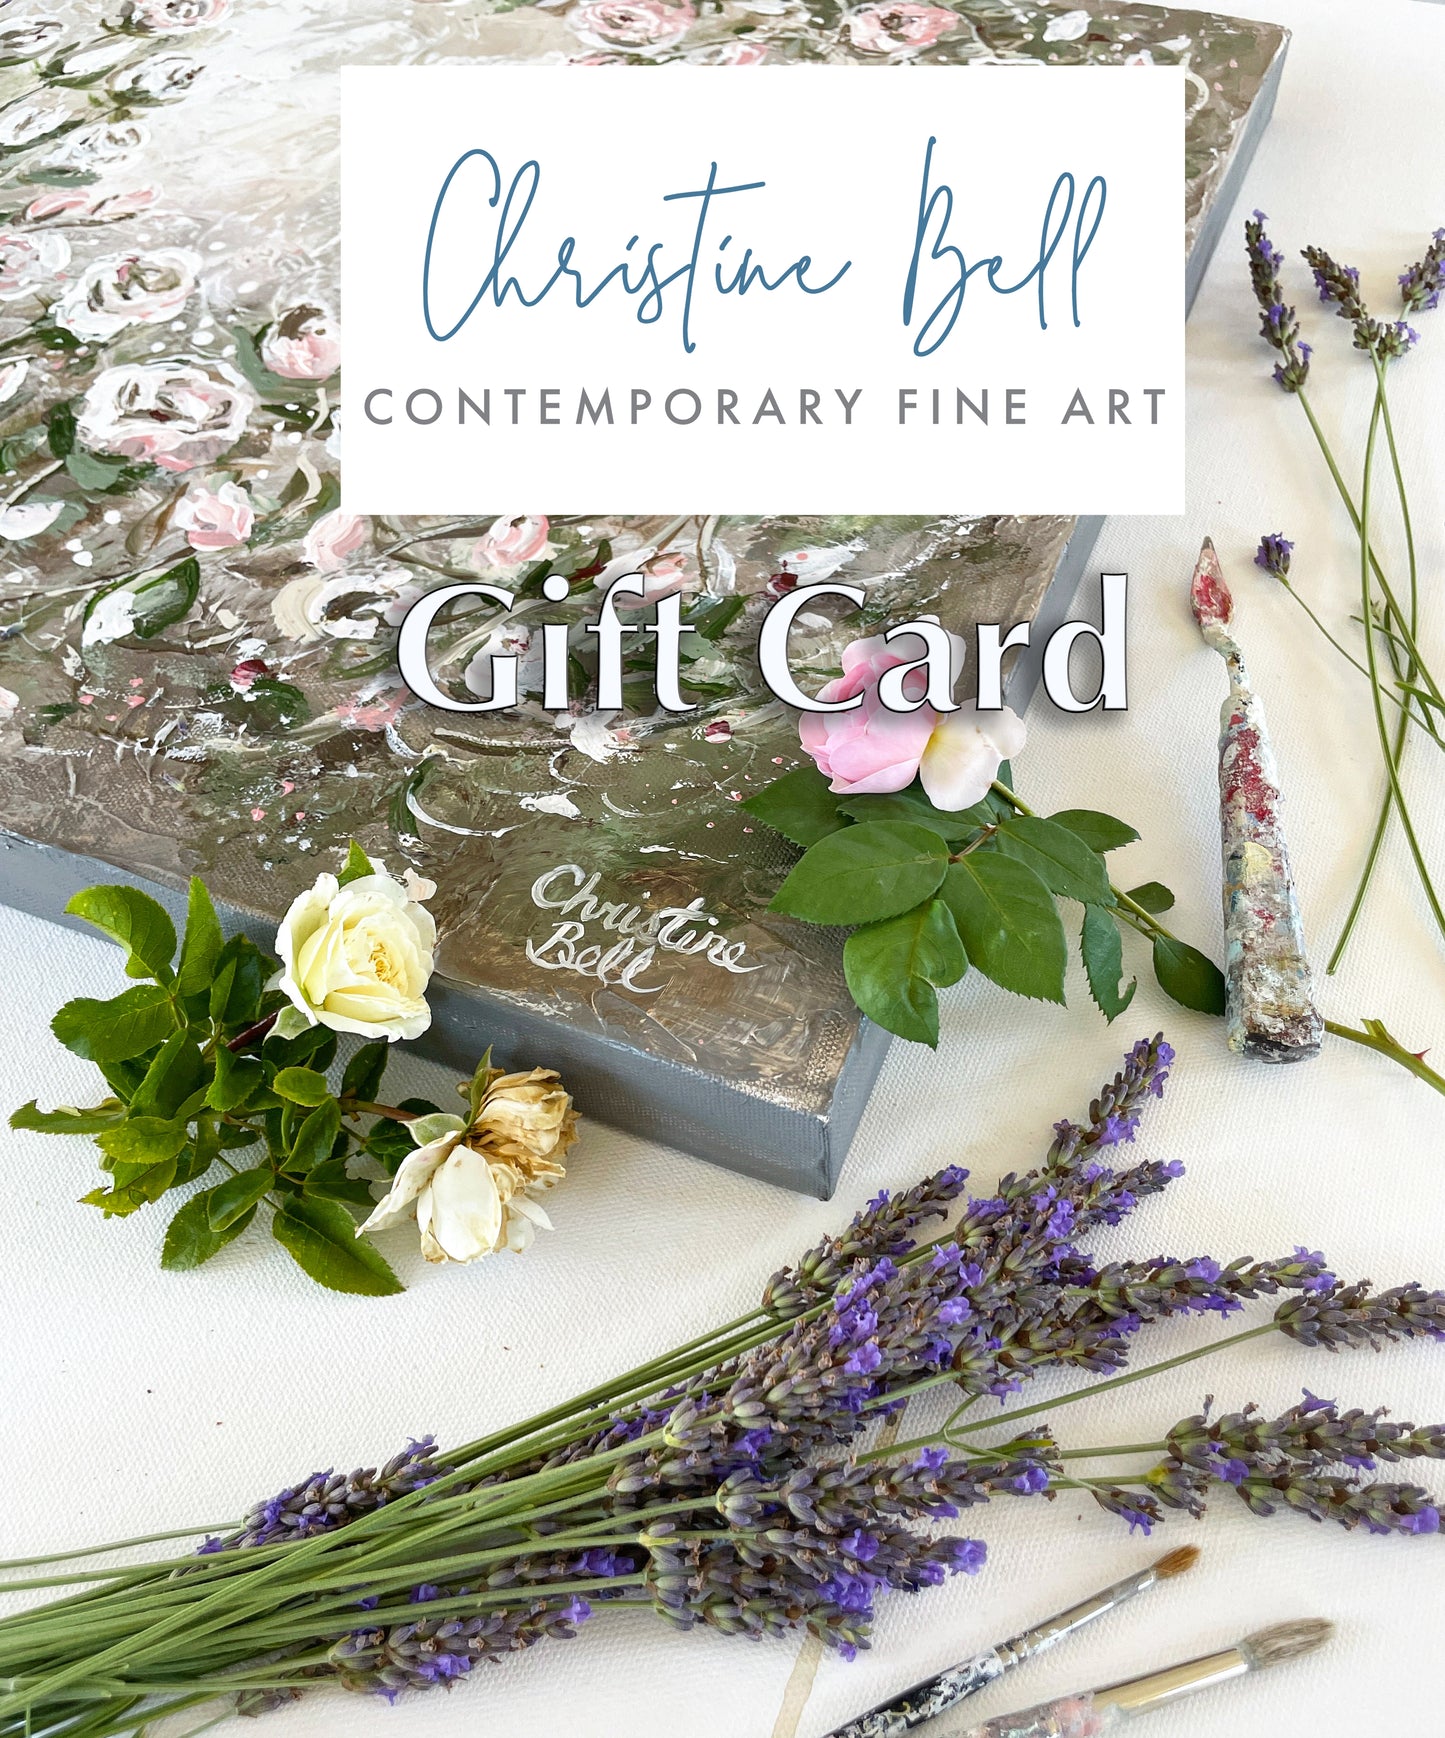 Gift Card - Contemporary Art by Christine